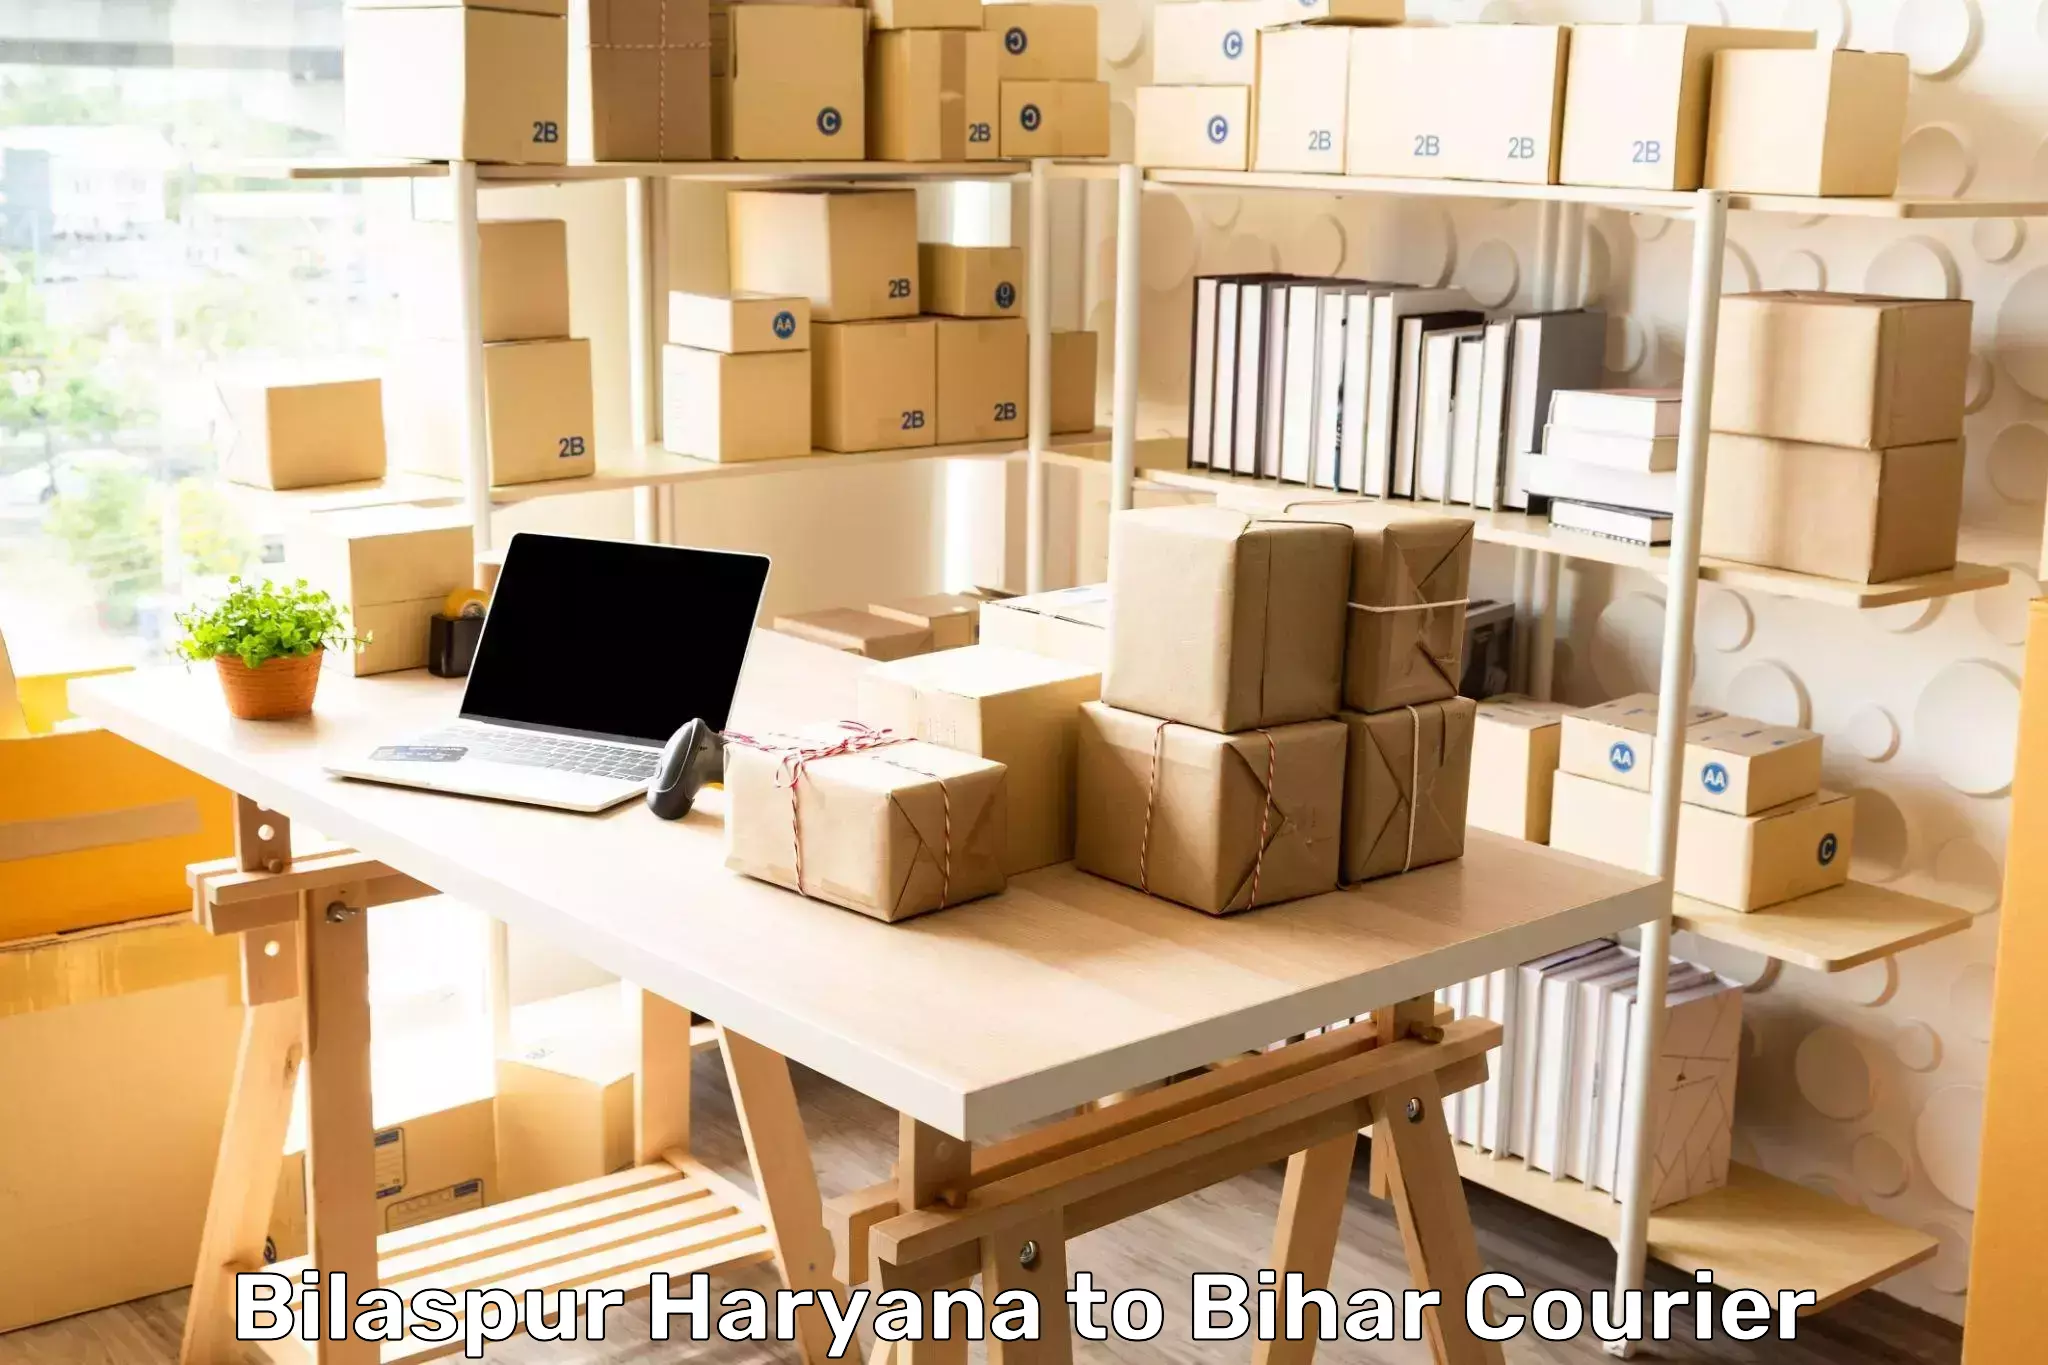 Express delivery network Bilaspur Haryana to Runni Saidpur